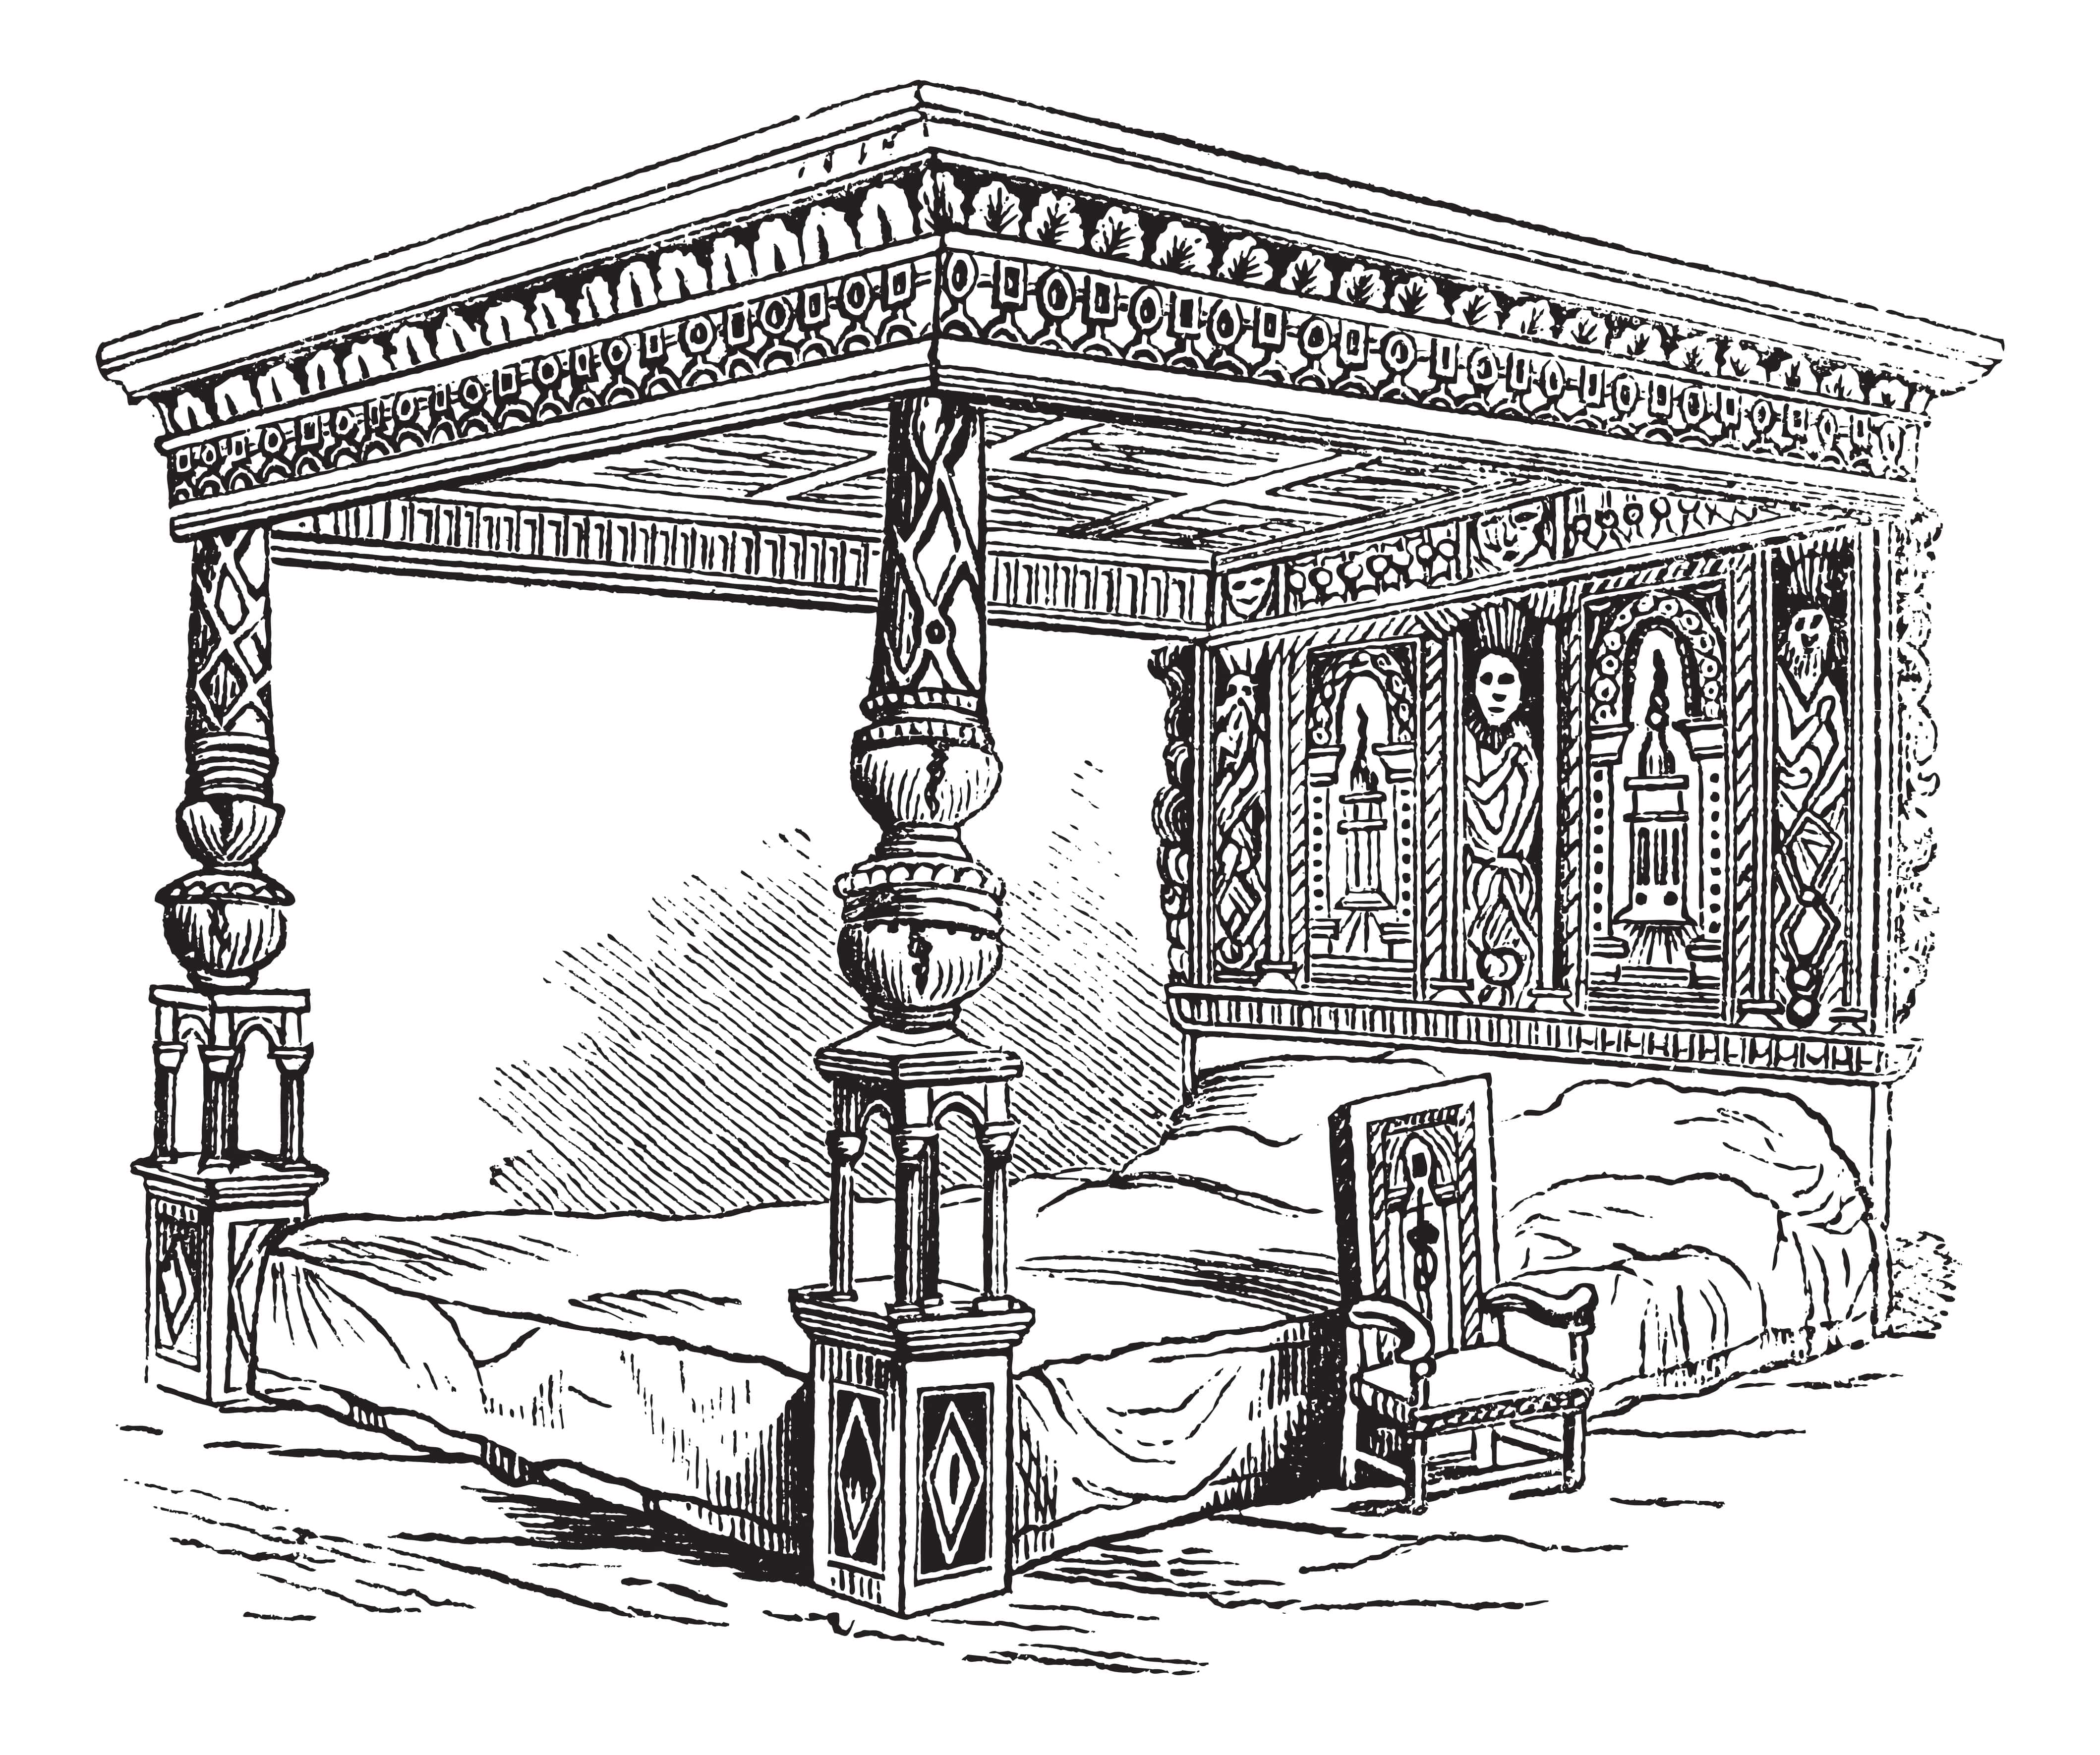 An engraving of the Great Bed of Ware